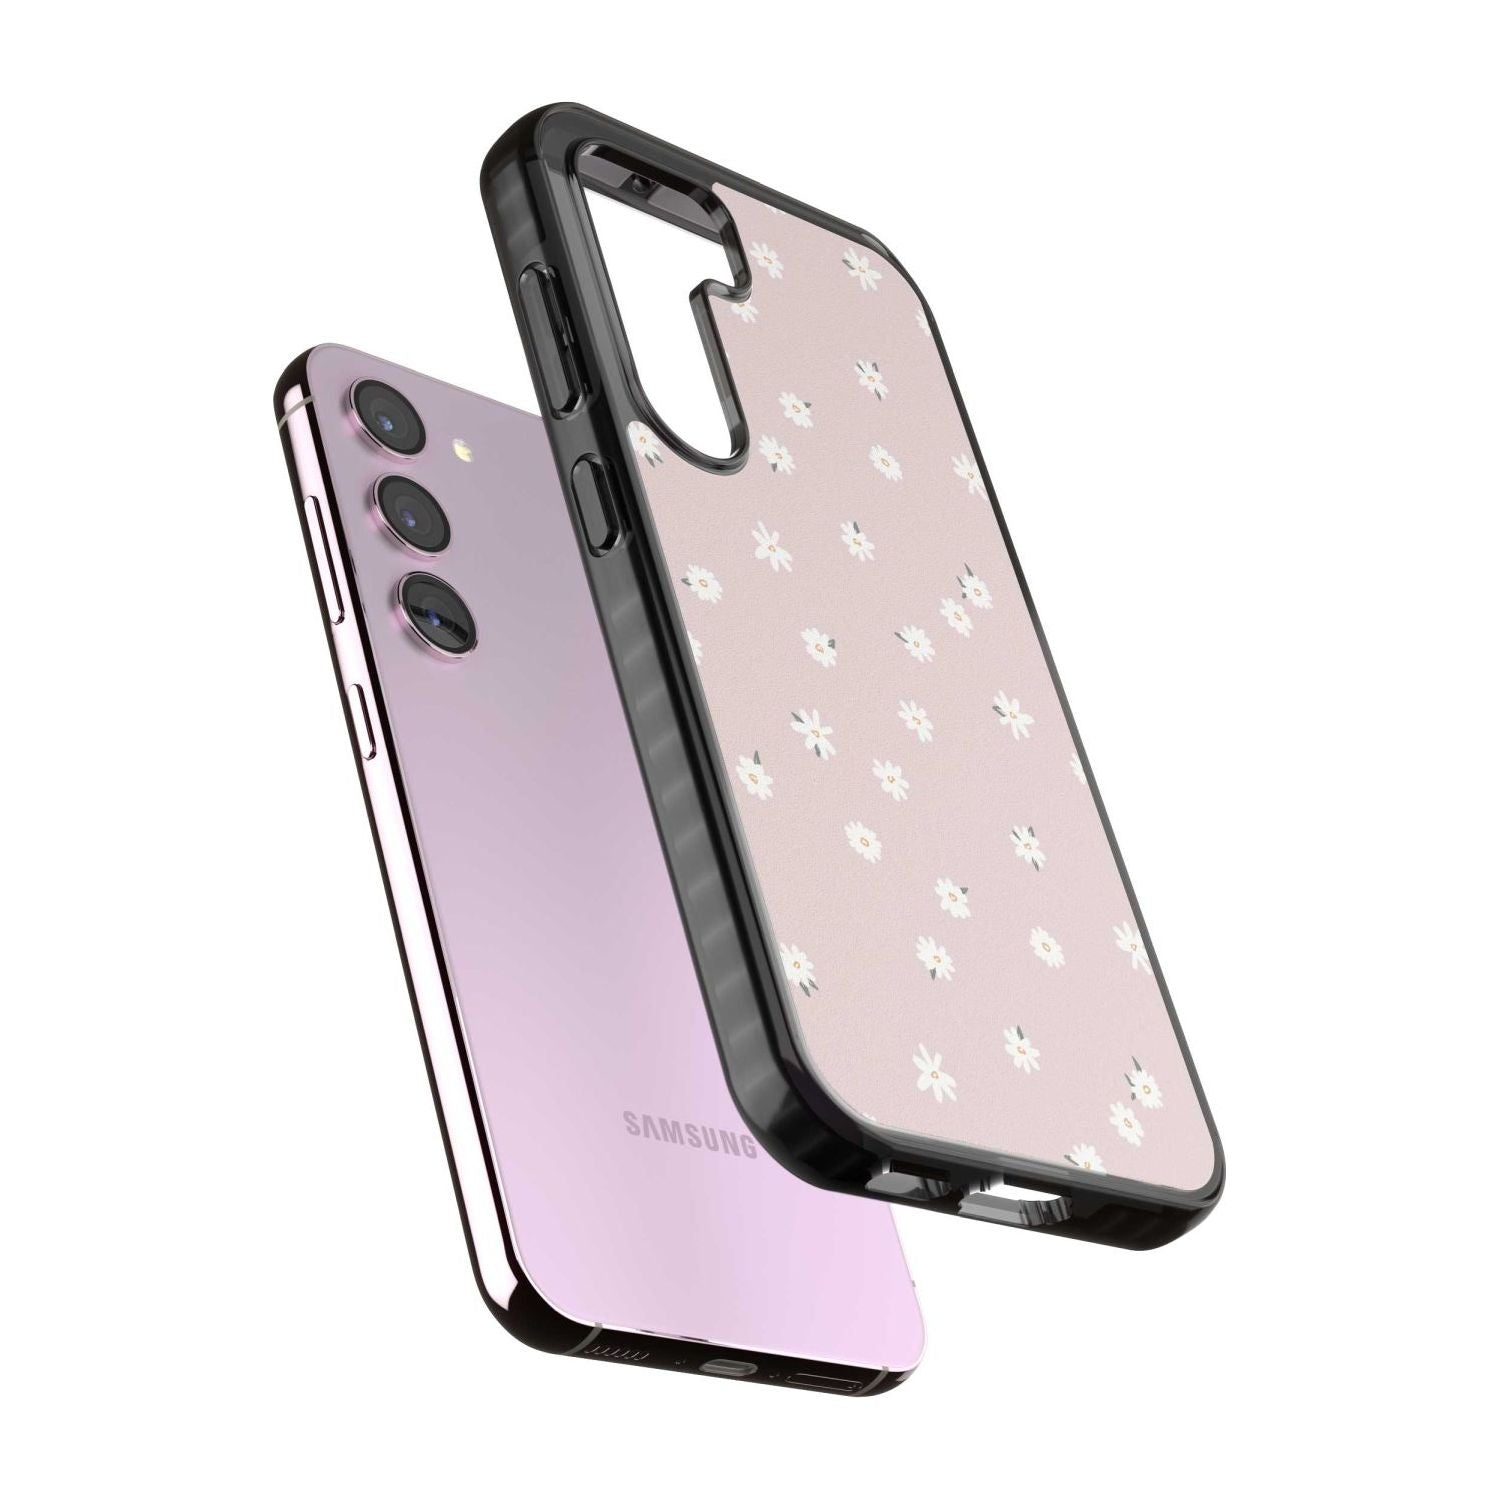 Painted Daises on Pink Phone Case iPhone 15 Pro Max / Black Impact Case,iPhone 15 Plus / Black Impact Case,iPhone 15 Pro / Black Impact Case,iPhone 15 / Black Impact Case,iPhone 15 Pro Max / Impact Case,iPhone 15 Plus / Impact Case,iPhone 15 Pro / Impact Case,iPhone 15 / Impact Case,iPhone 15 Pro Max / Magsafe Black Impact Case,iPhone 15 Plus / Magsafe Black Impact Case,iPhone 15 Pro / Magsafe Black Impact Case,iPhone 15 / Magsafe Black Impact Case,iPhone 14 Pro Max / Black Impact Case,iPhone 14 Plus / Blac